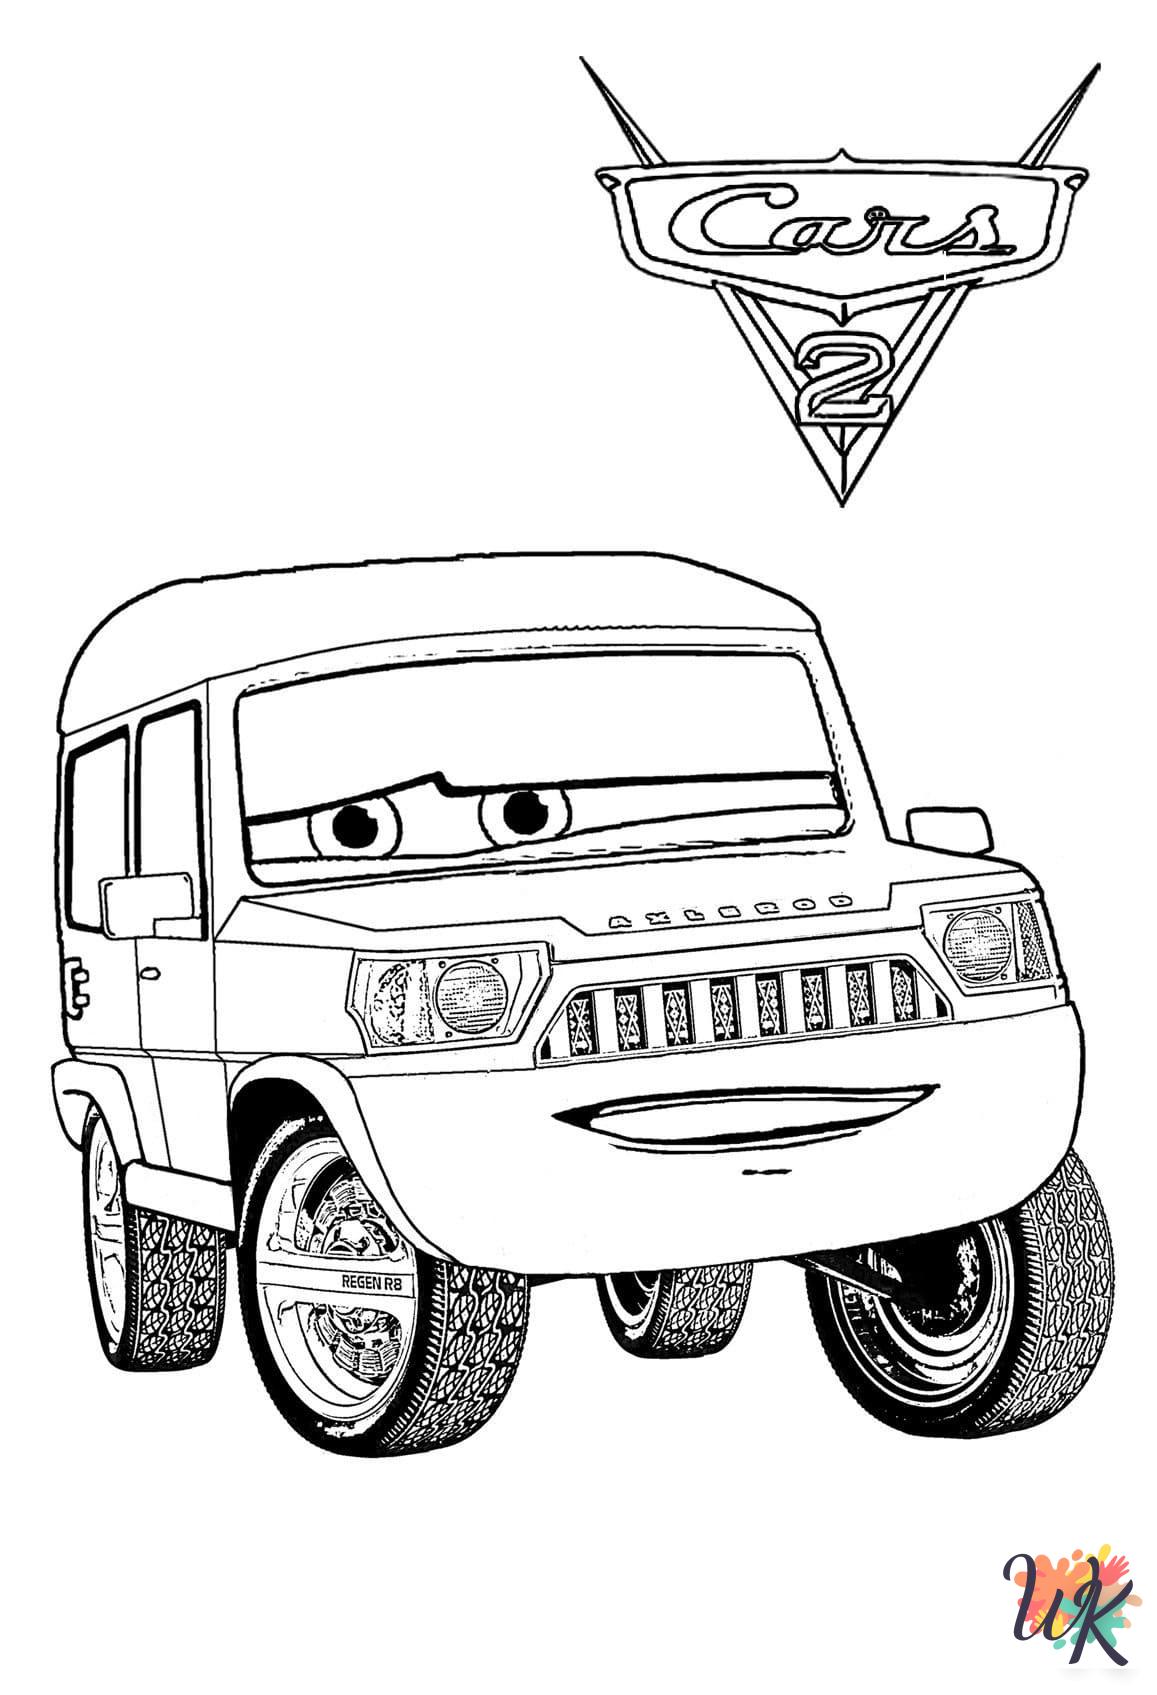 Cars Movie coloring pages for preschoolers